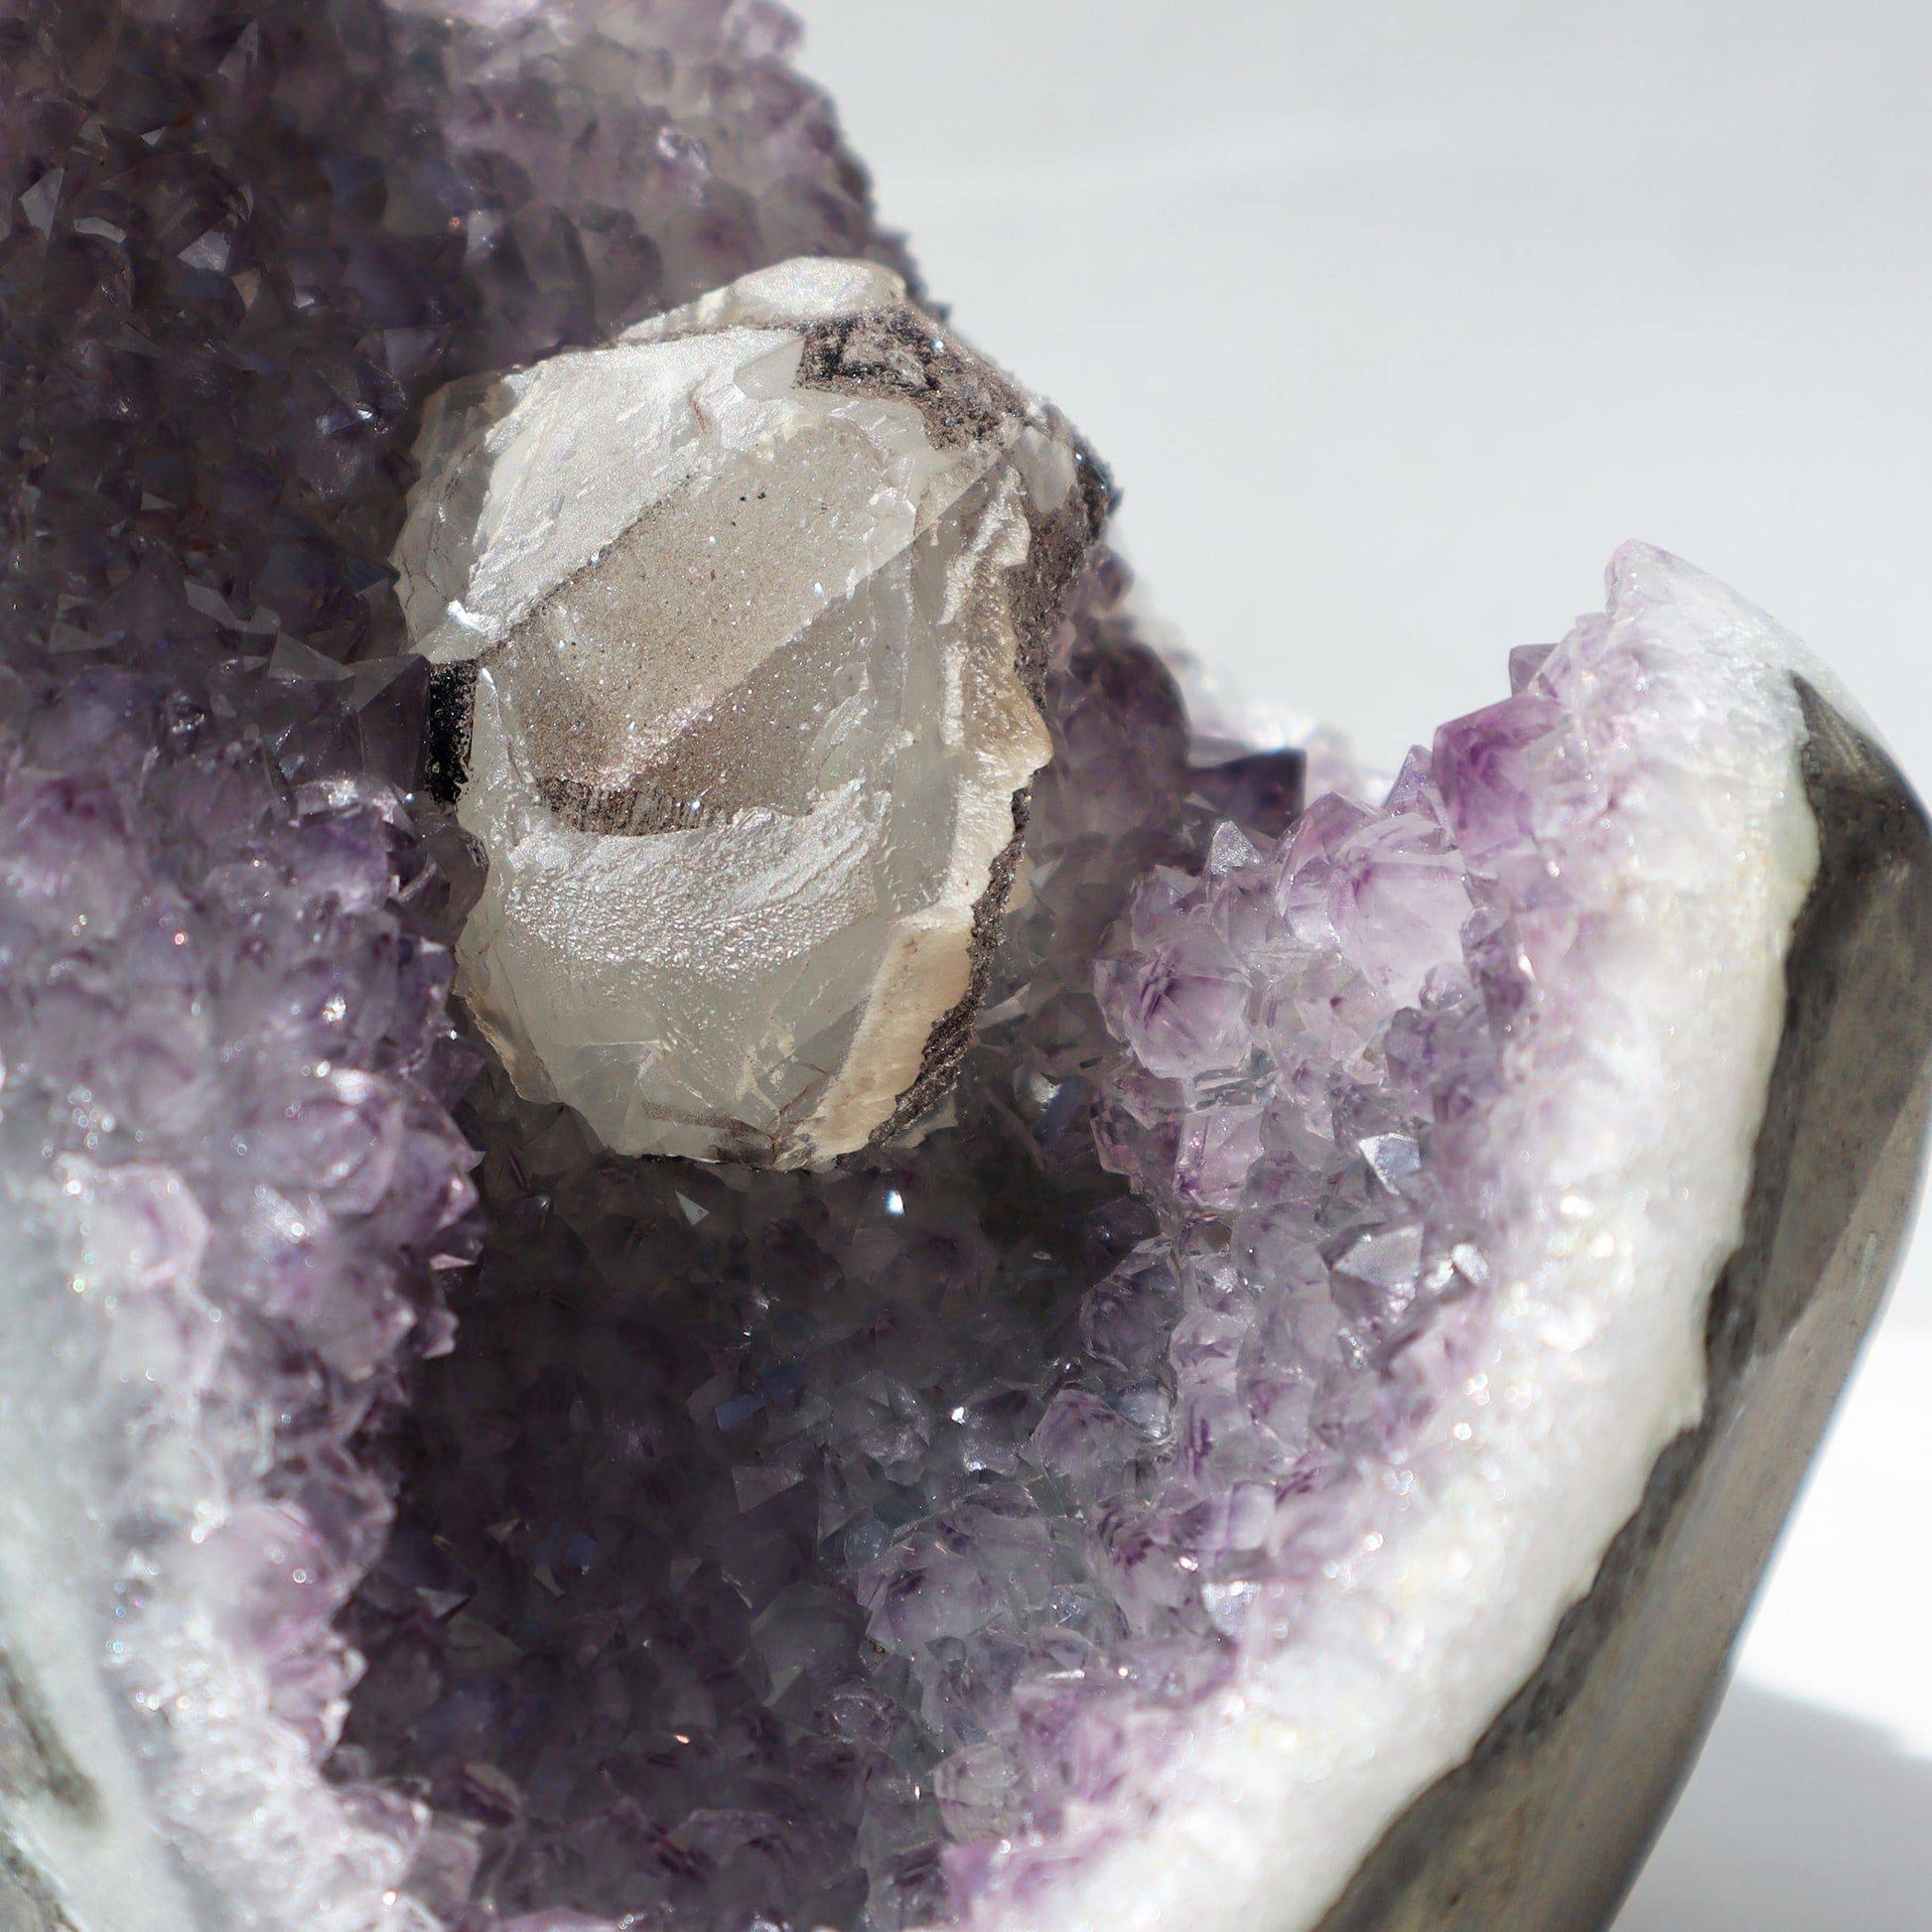 Rare Mineral on Calcite Amethyst Geode on Sale - Deepest Earth